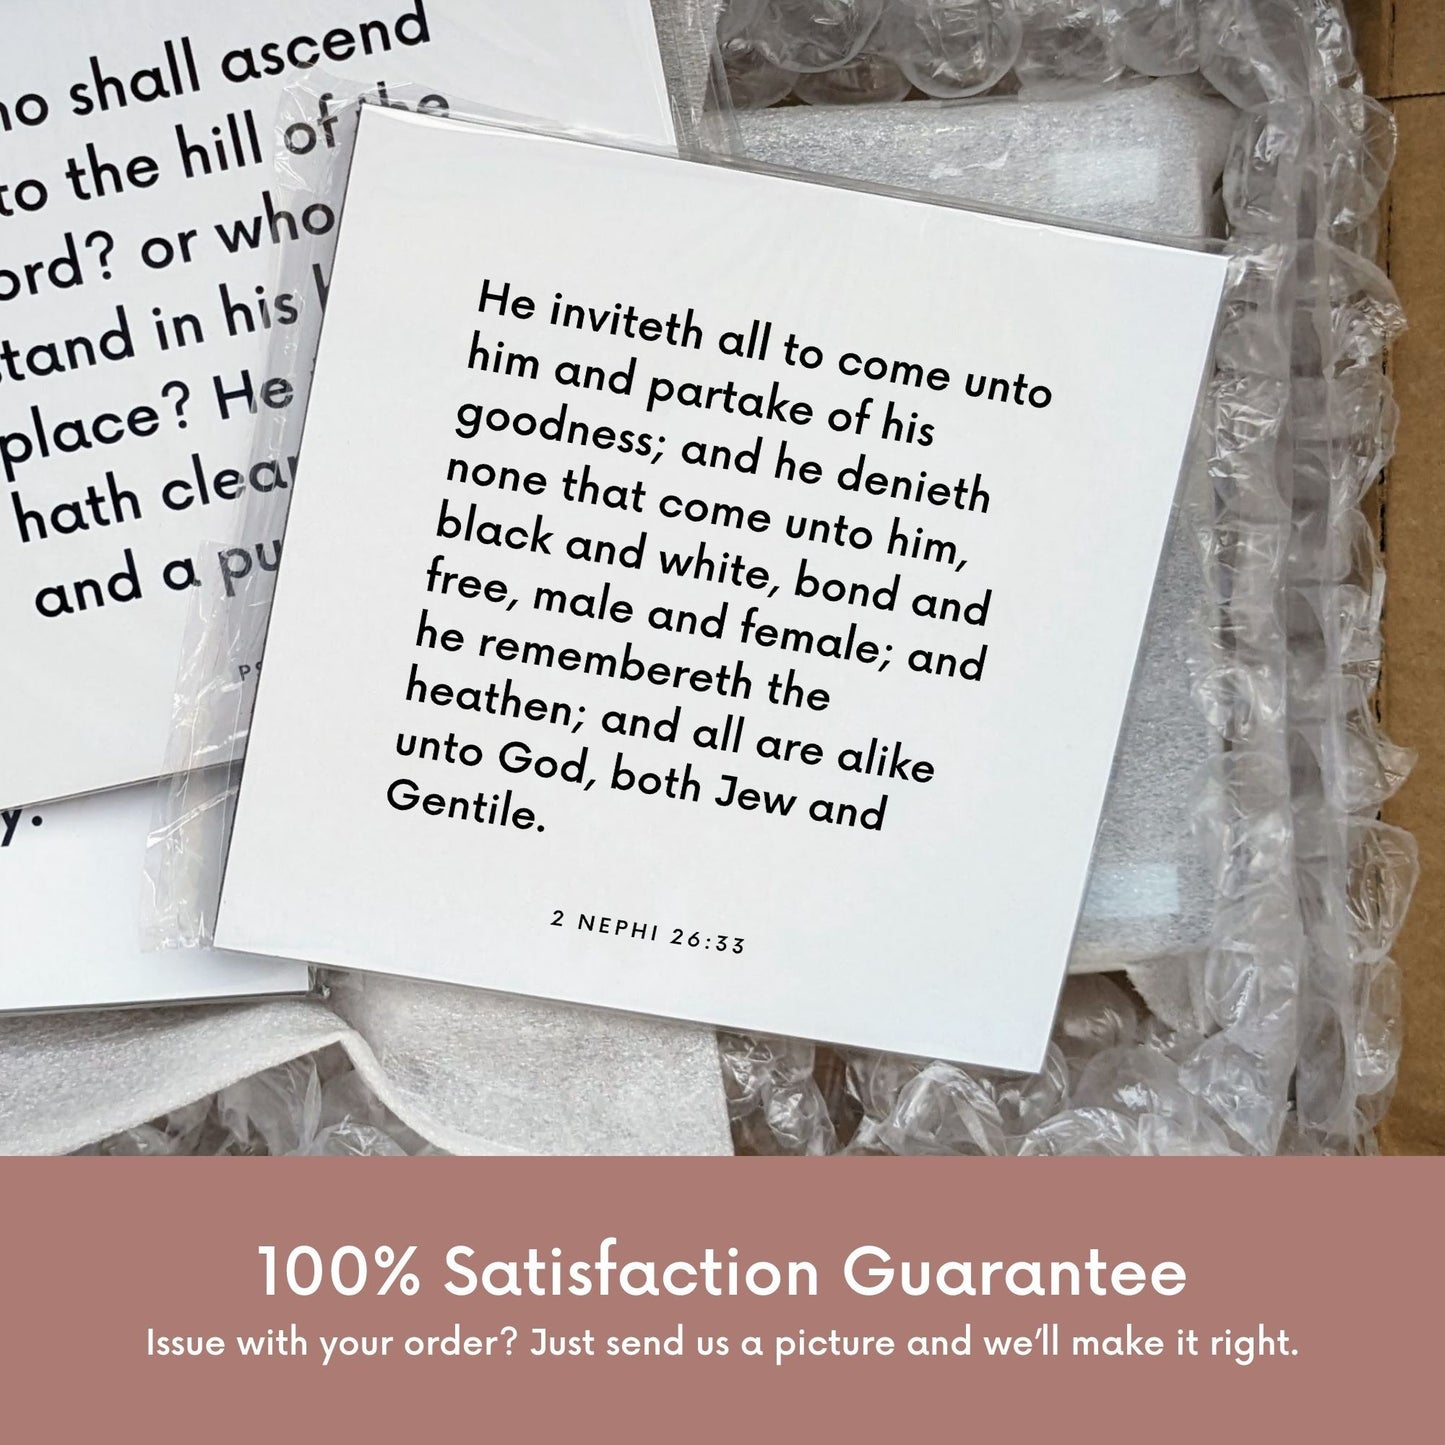 Shipping materials for scripture tile of 2 Nephi 26:33 - "He inviteth all to come unto him"